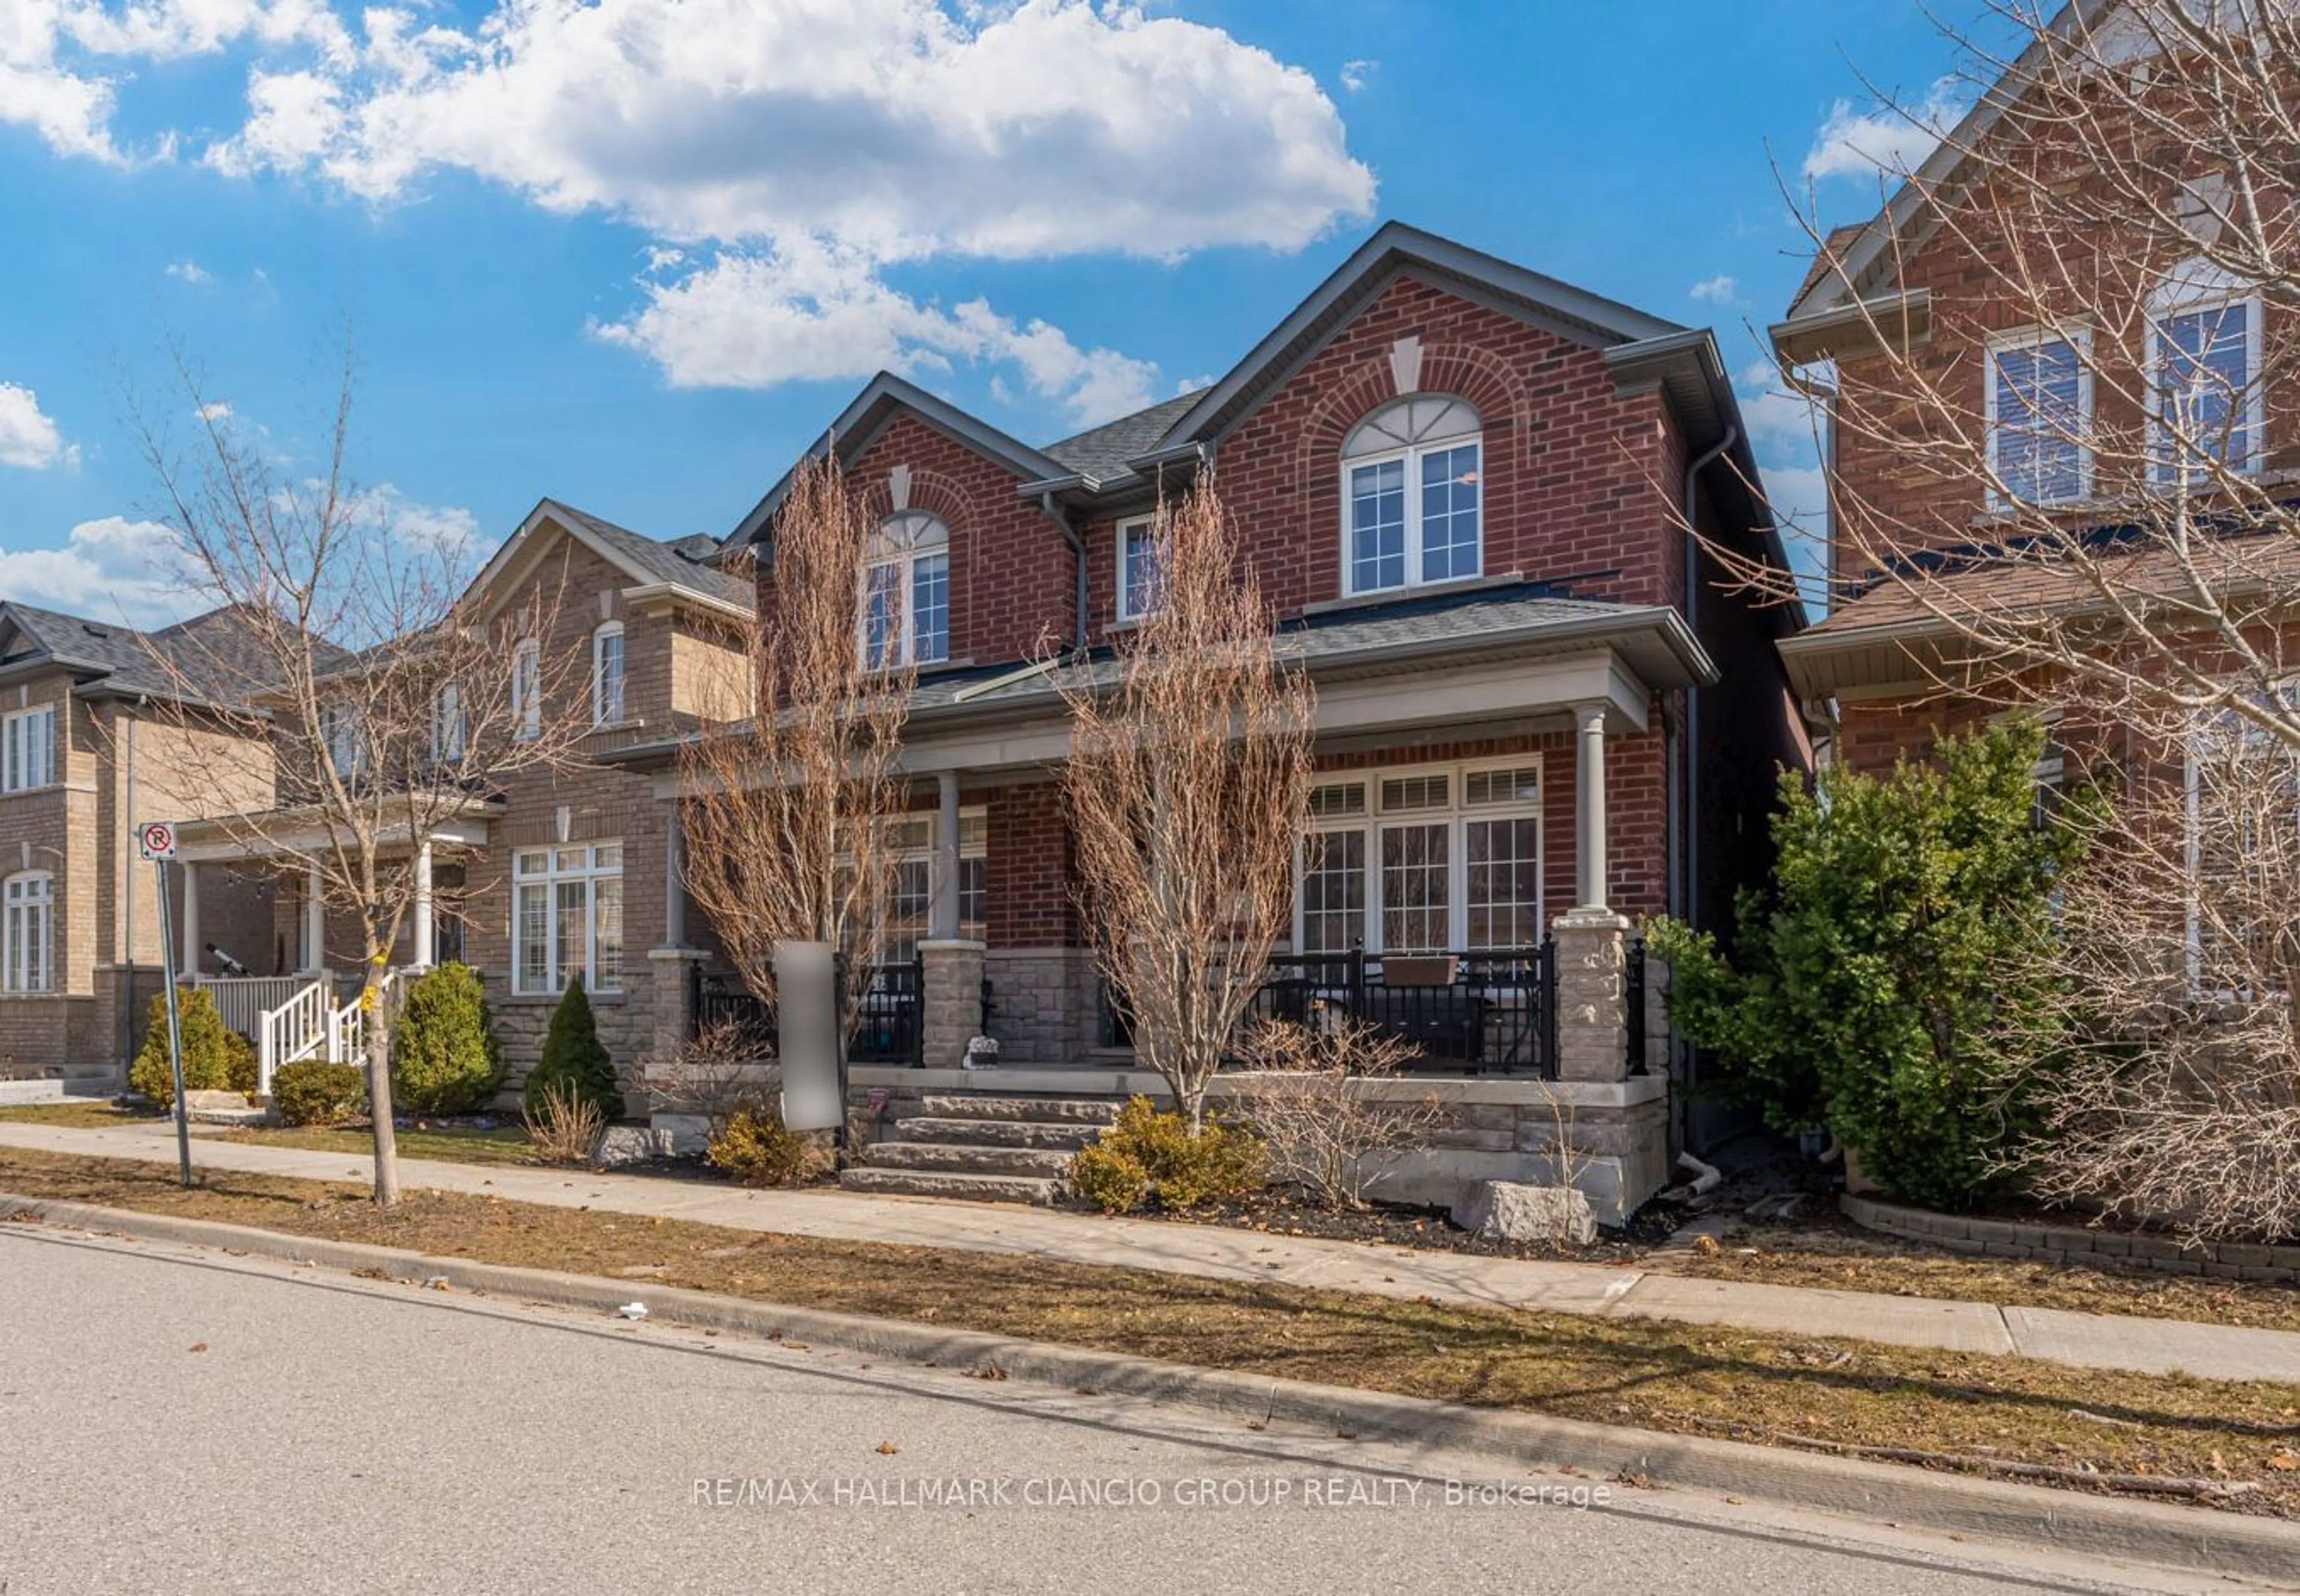 Home with brick exterior material for 43 Balsam St, Markham Ontario L6B 0P5